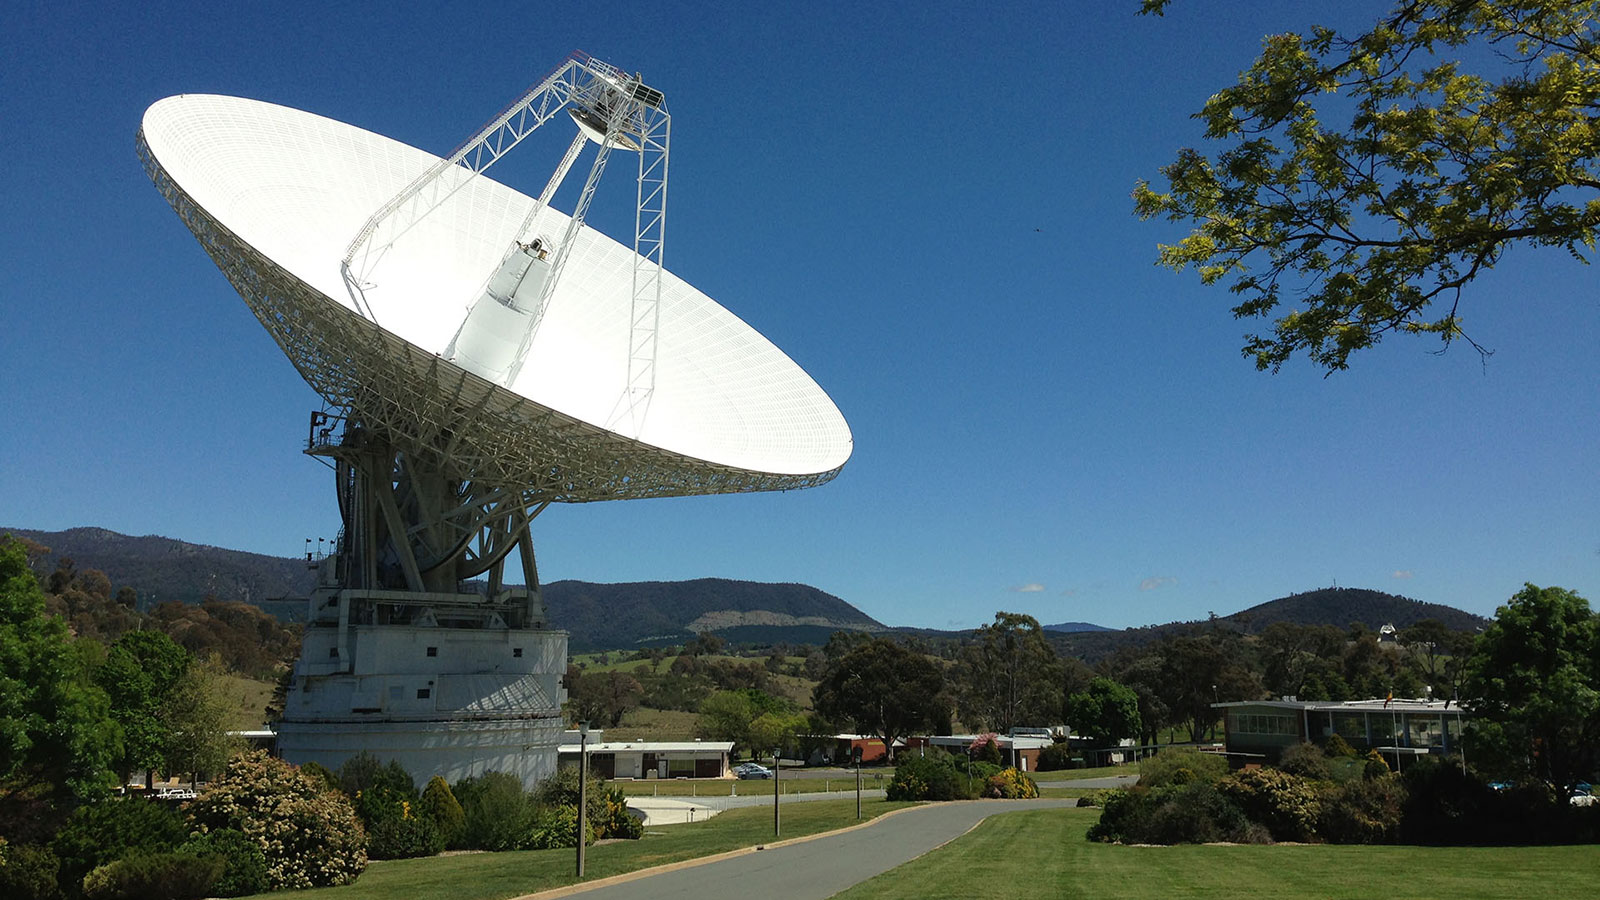 A giant satellite dish points toward the sky in a green landscape.